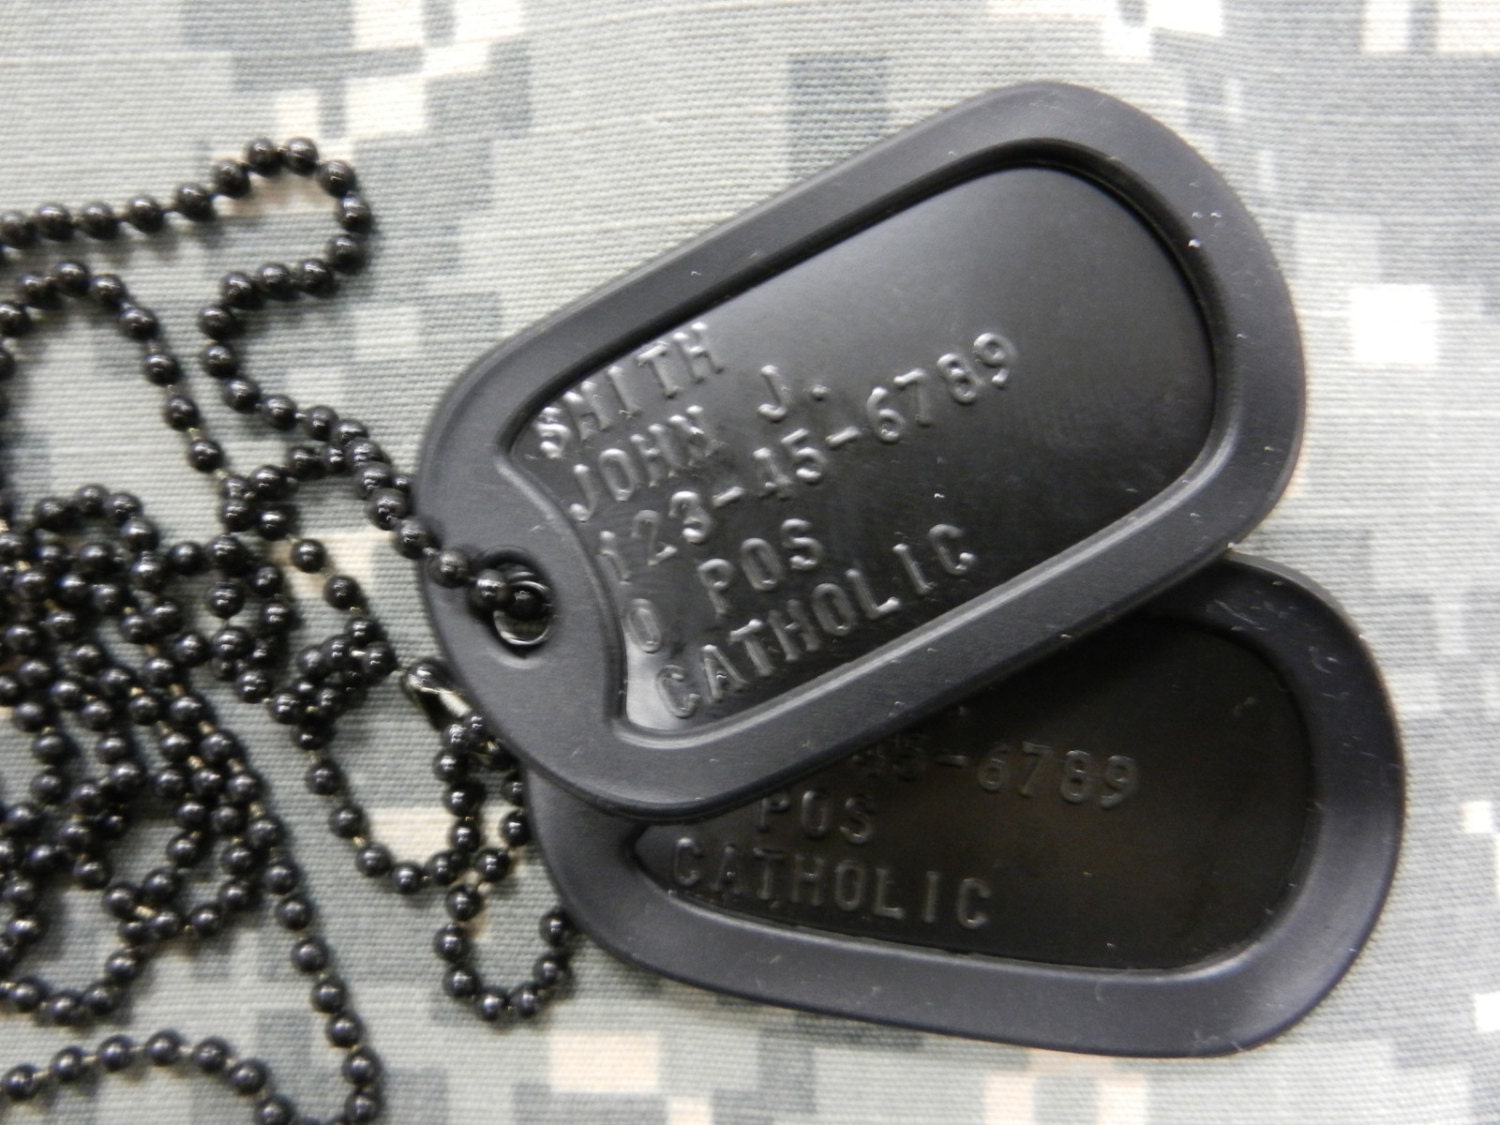 military dog tags for dogs